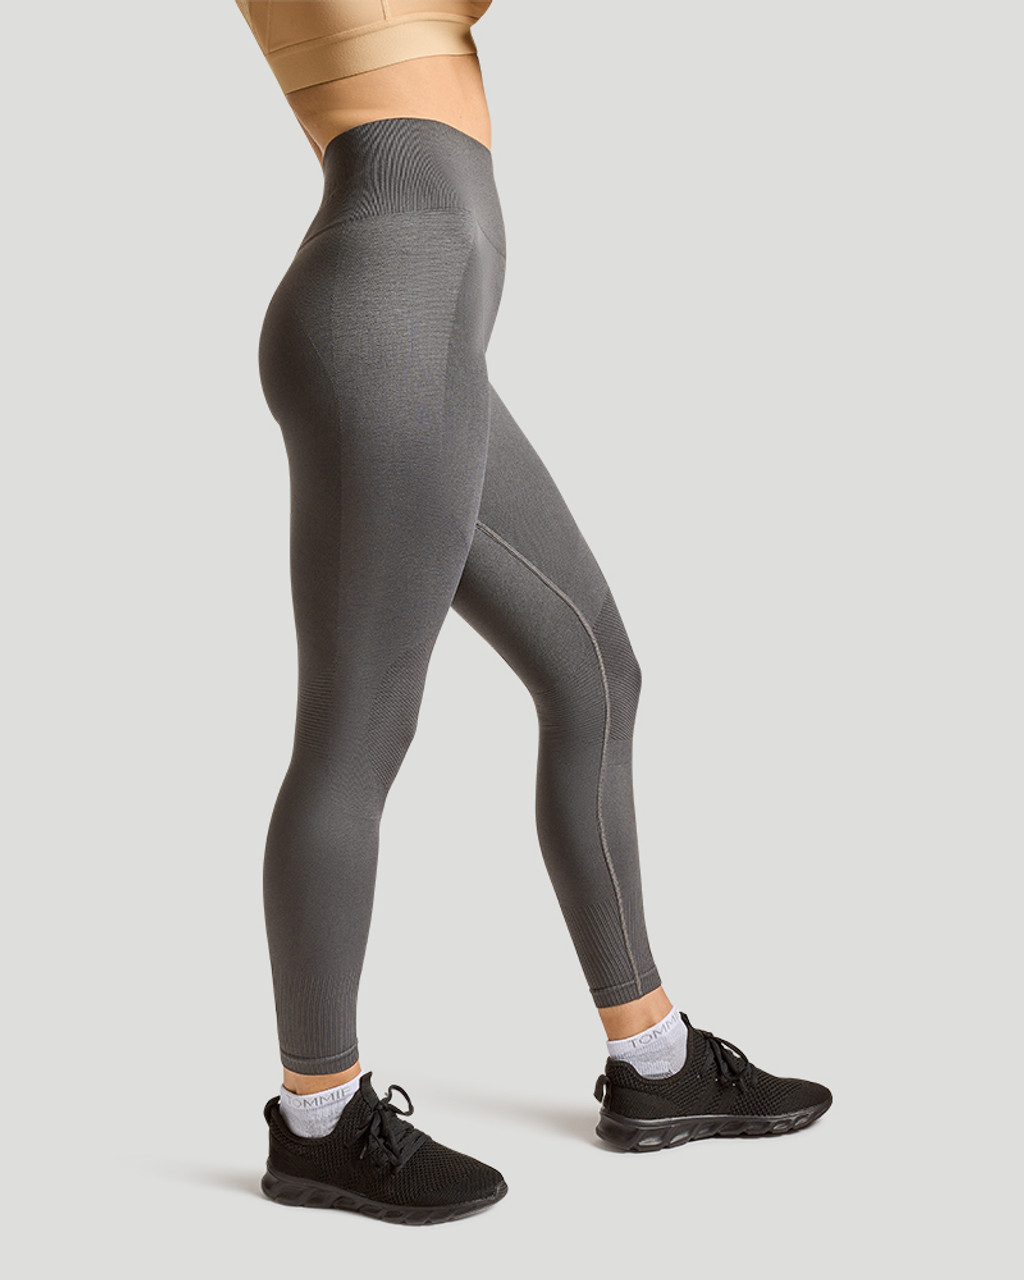 Zeet RECOVERY COMPRESSION PANTS LEGGINGS Gray Size 0 C63